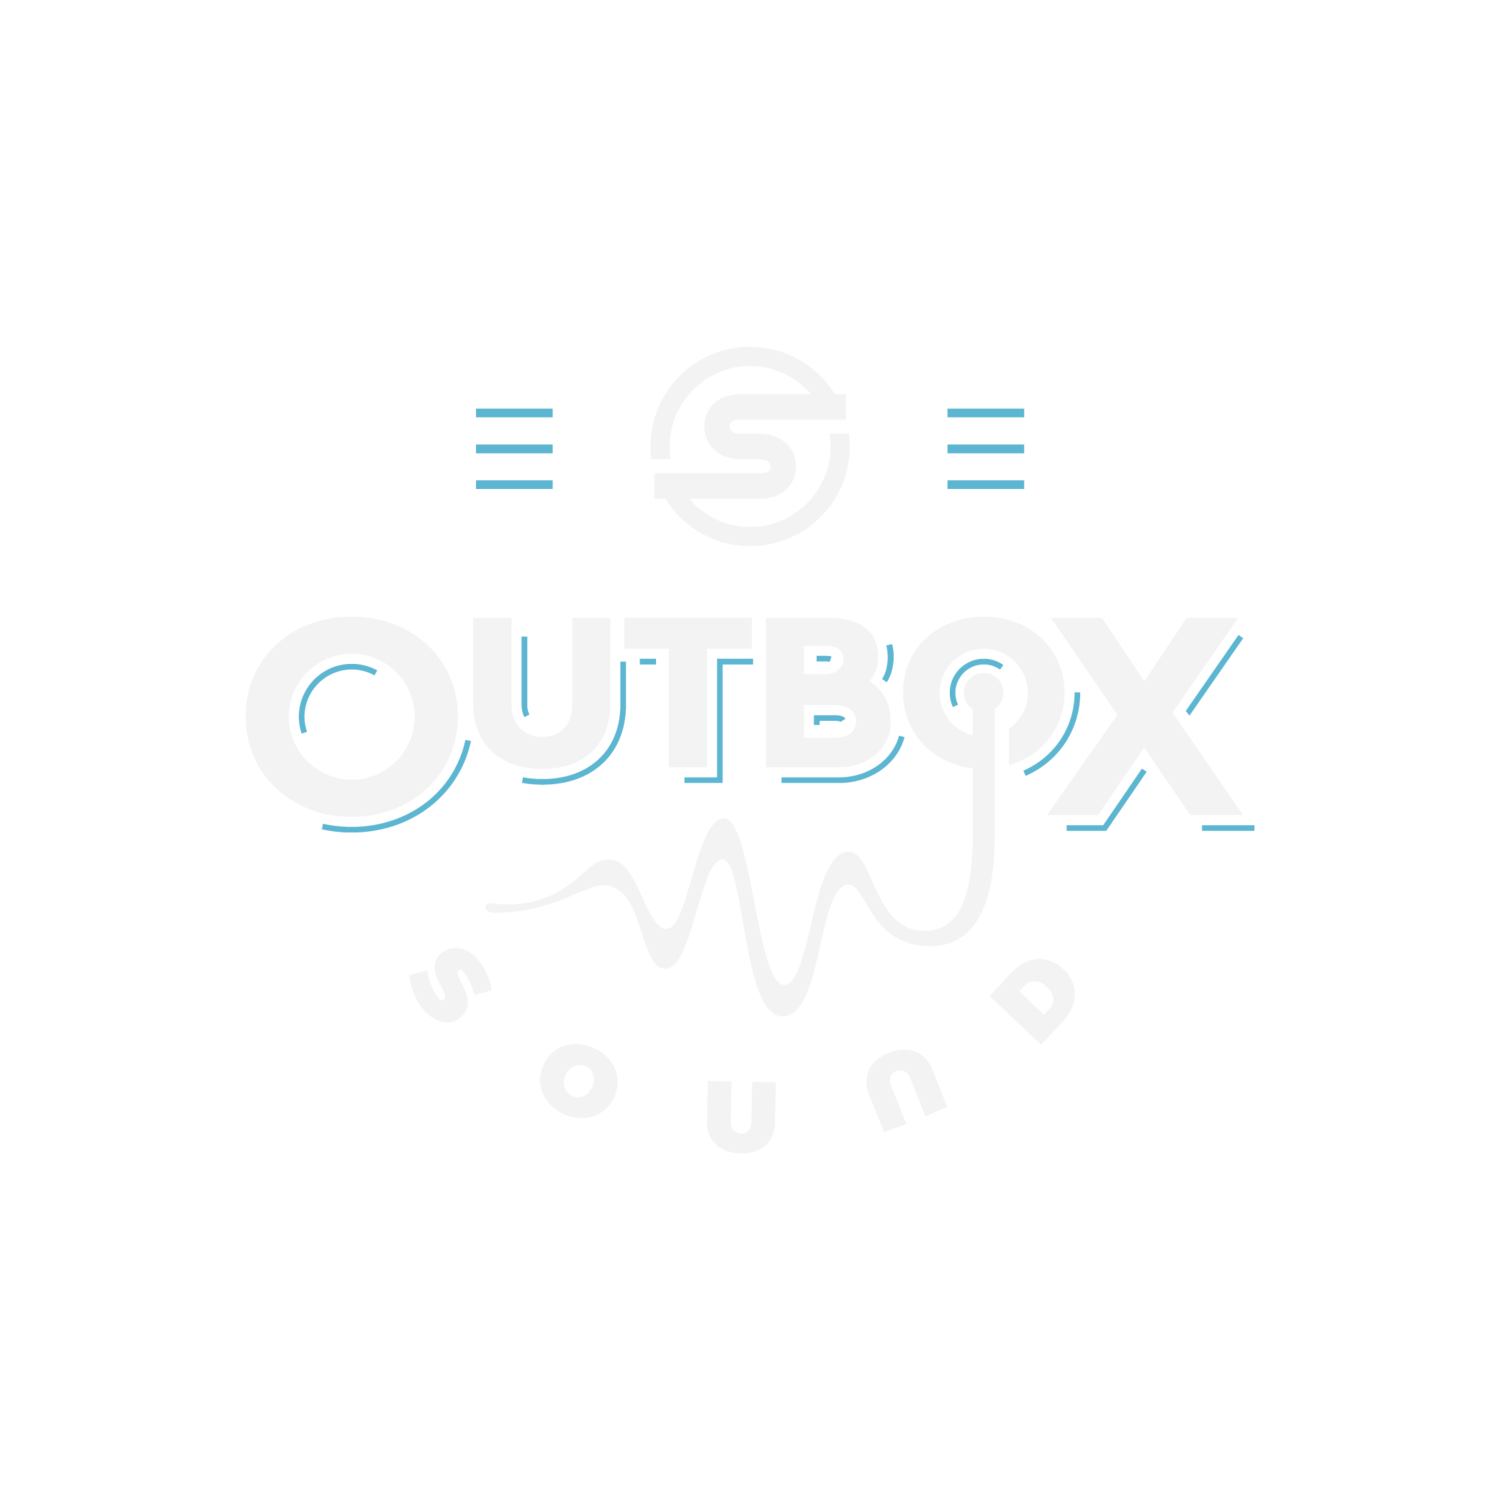 Outbox Sound